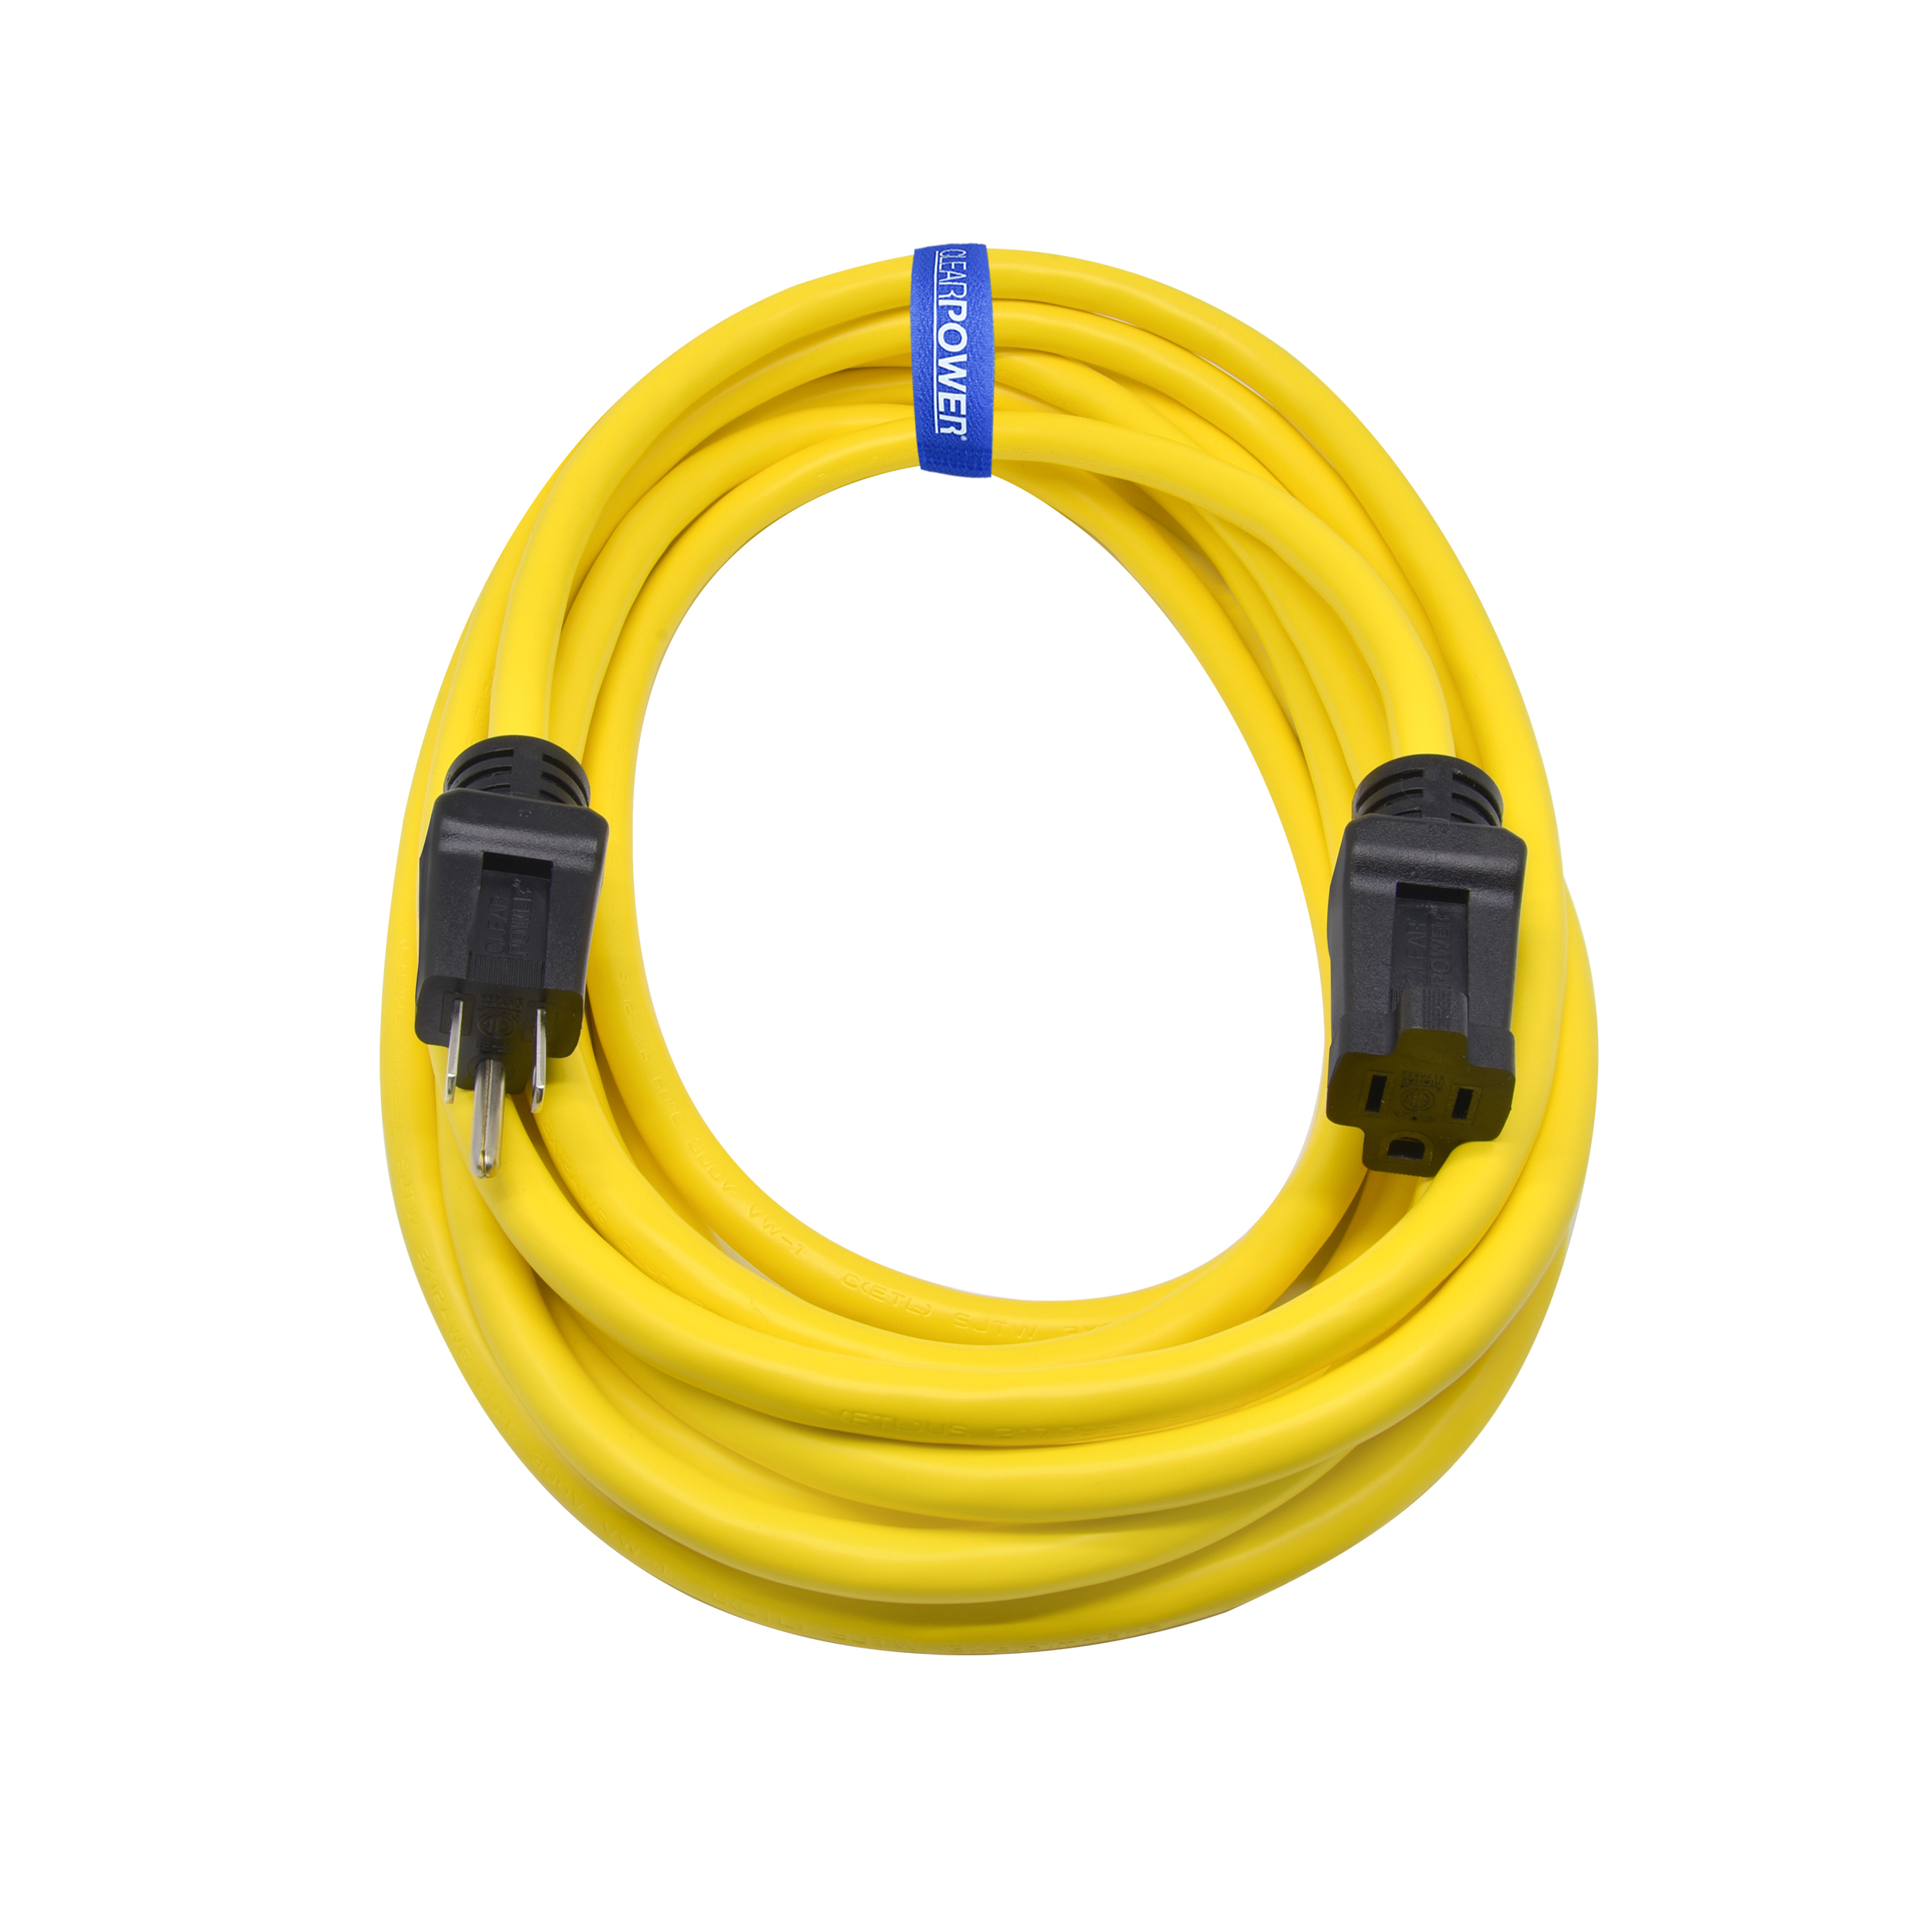 Clear Power 12/3 SJTW 25 ft Heavy Duty Outdoor Extension Cord, Yellow, CP10144 - image 1 of 11